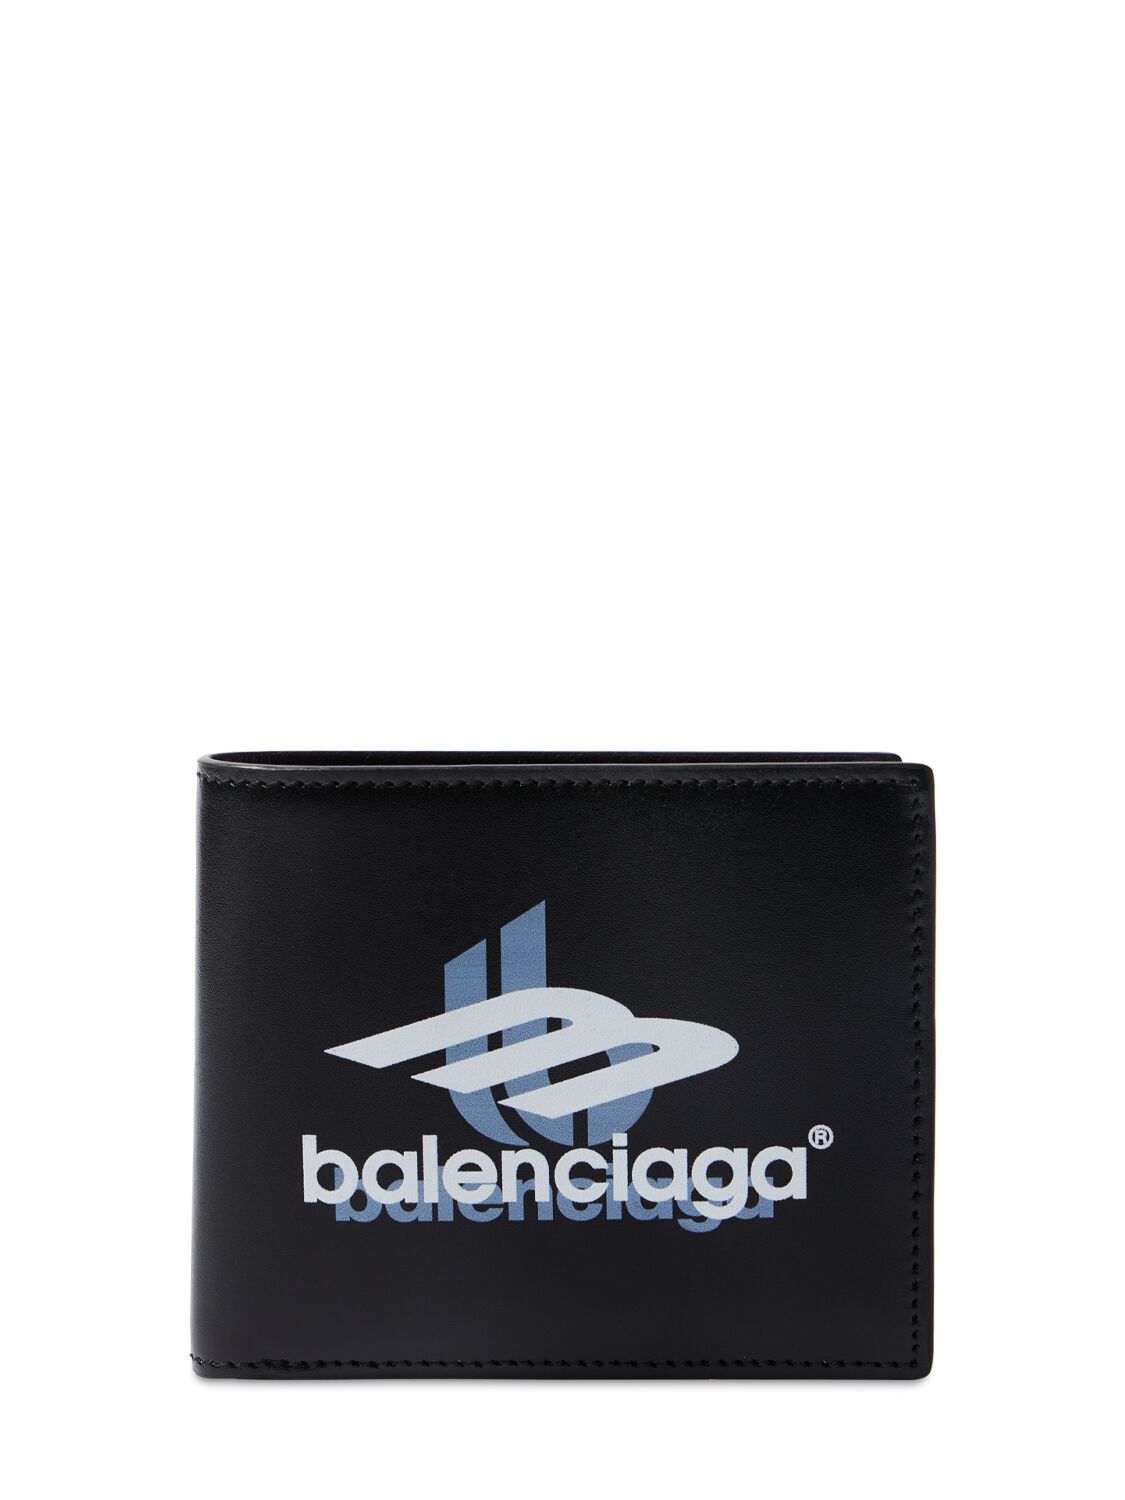 Balenciaga Square Leather Folded Wallet In Black